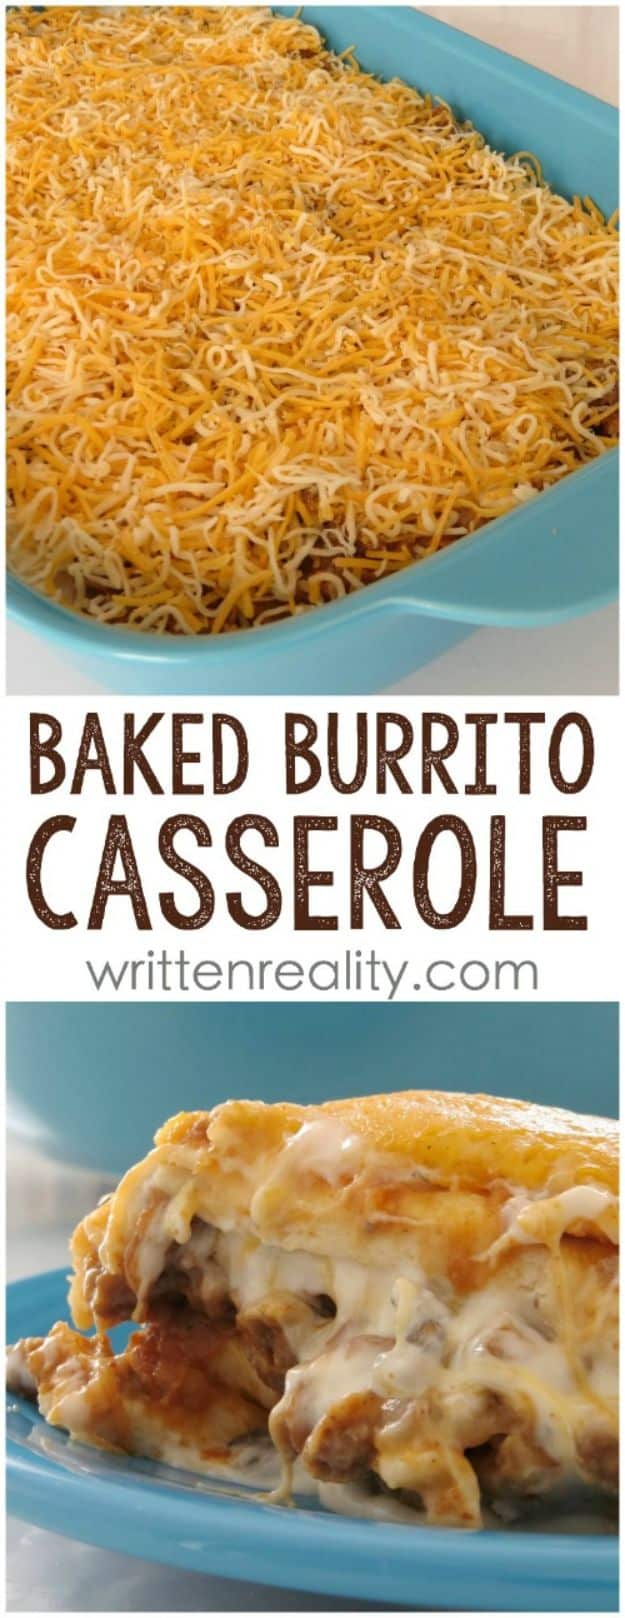 Best Mexican Food Recipes - Baked Burrito Casserole – Homemade Authentic Mexican Version - Mexican Beef Soup - Authentic Mexican Foods and Recipe Ideas for Casseroles, Quesadillas, Tacos, Appetizers, Tamales, Enchiladas, Crockpot, Chicken, Beef and Healthy Foods - Desserts and  dessert#recipes #mexican